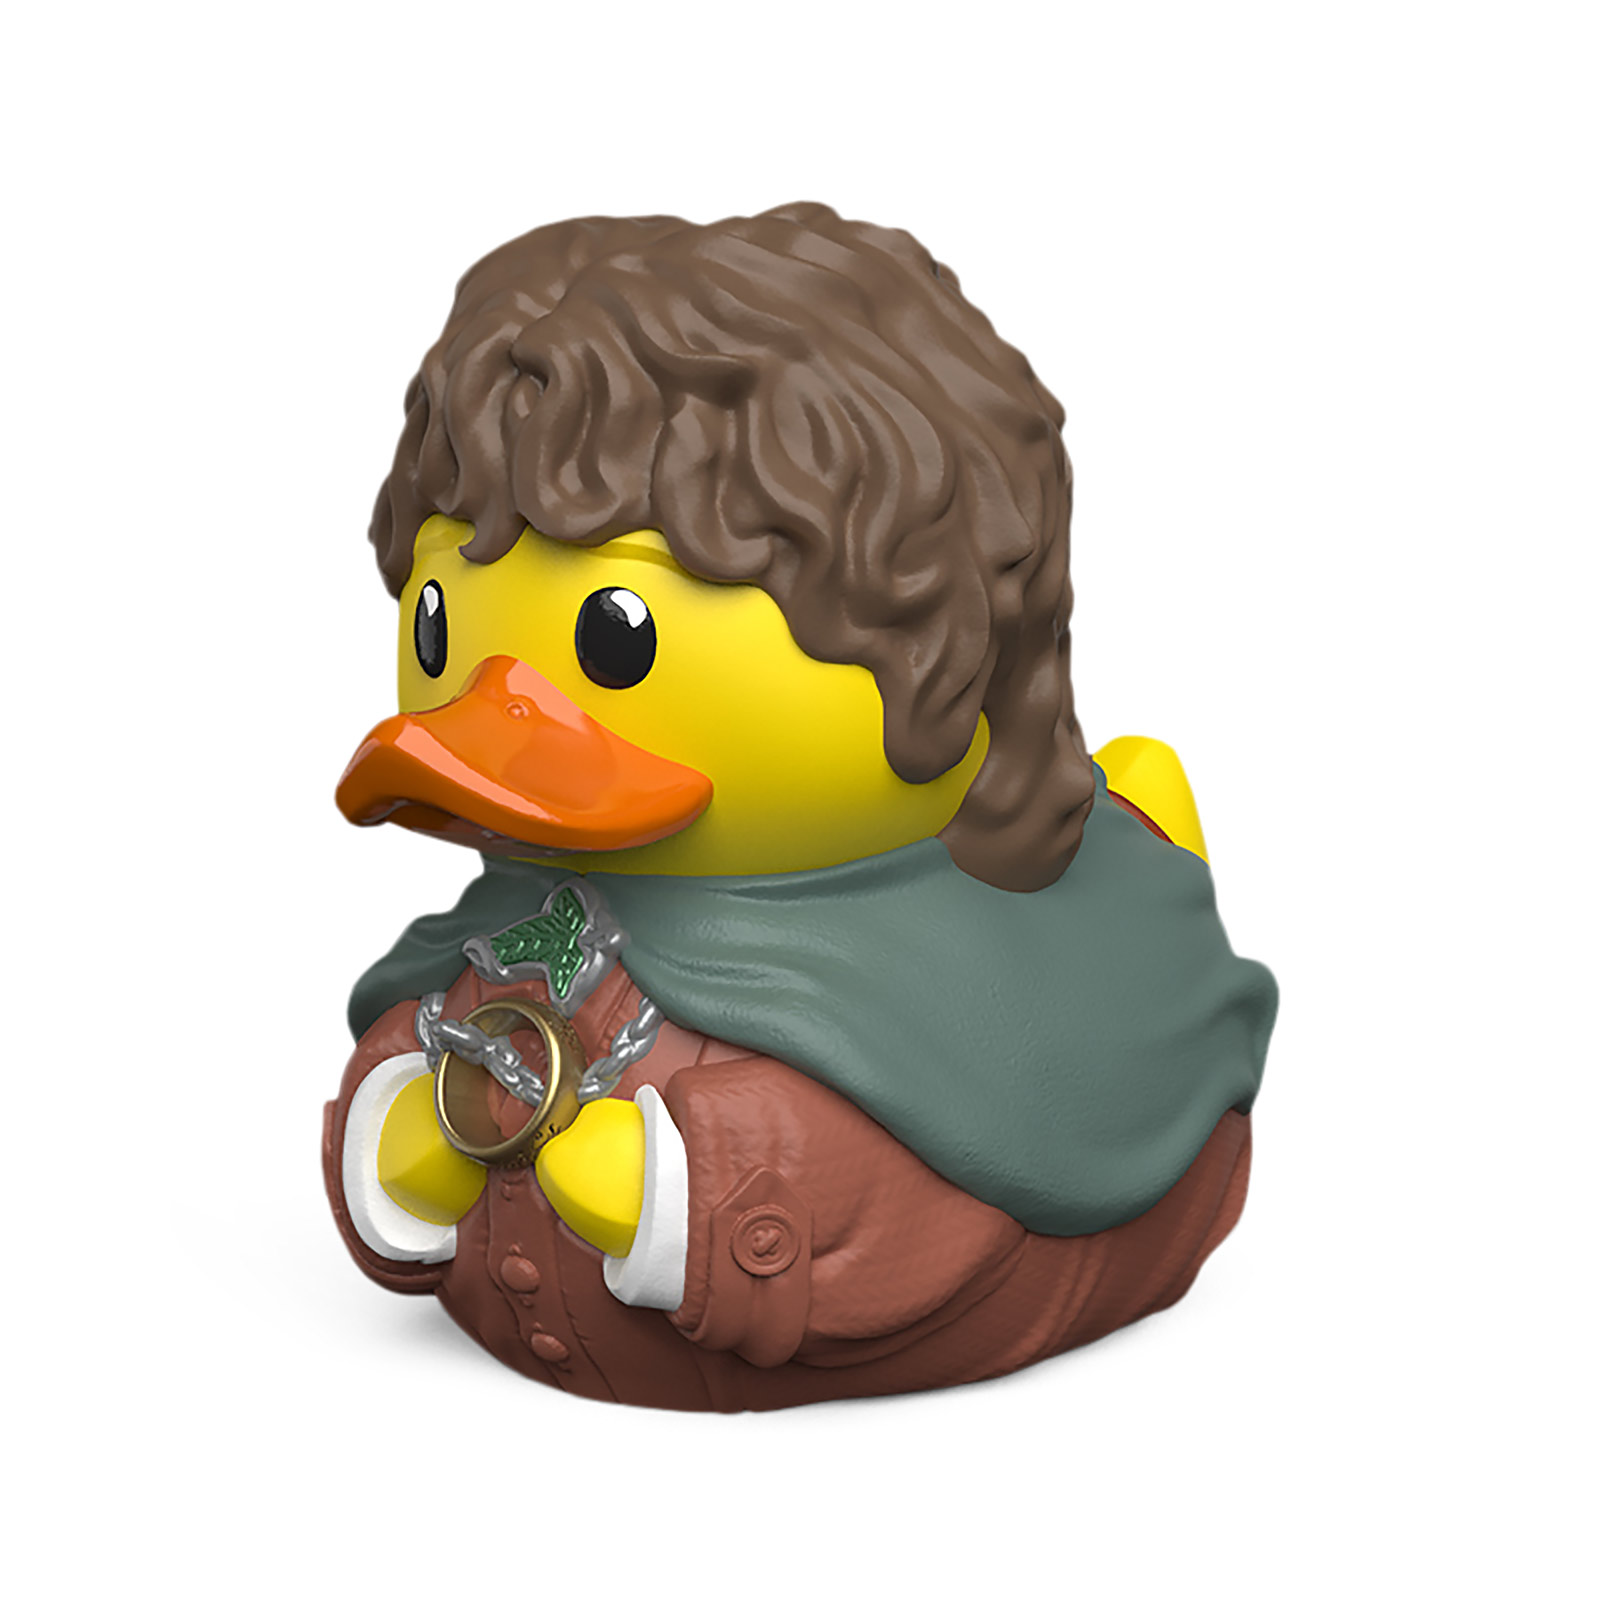 Lord of the Rings - Frodo TUBBZ Decorative Duck